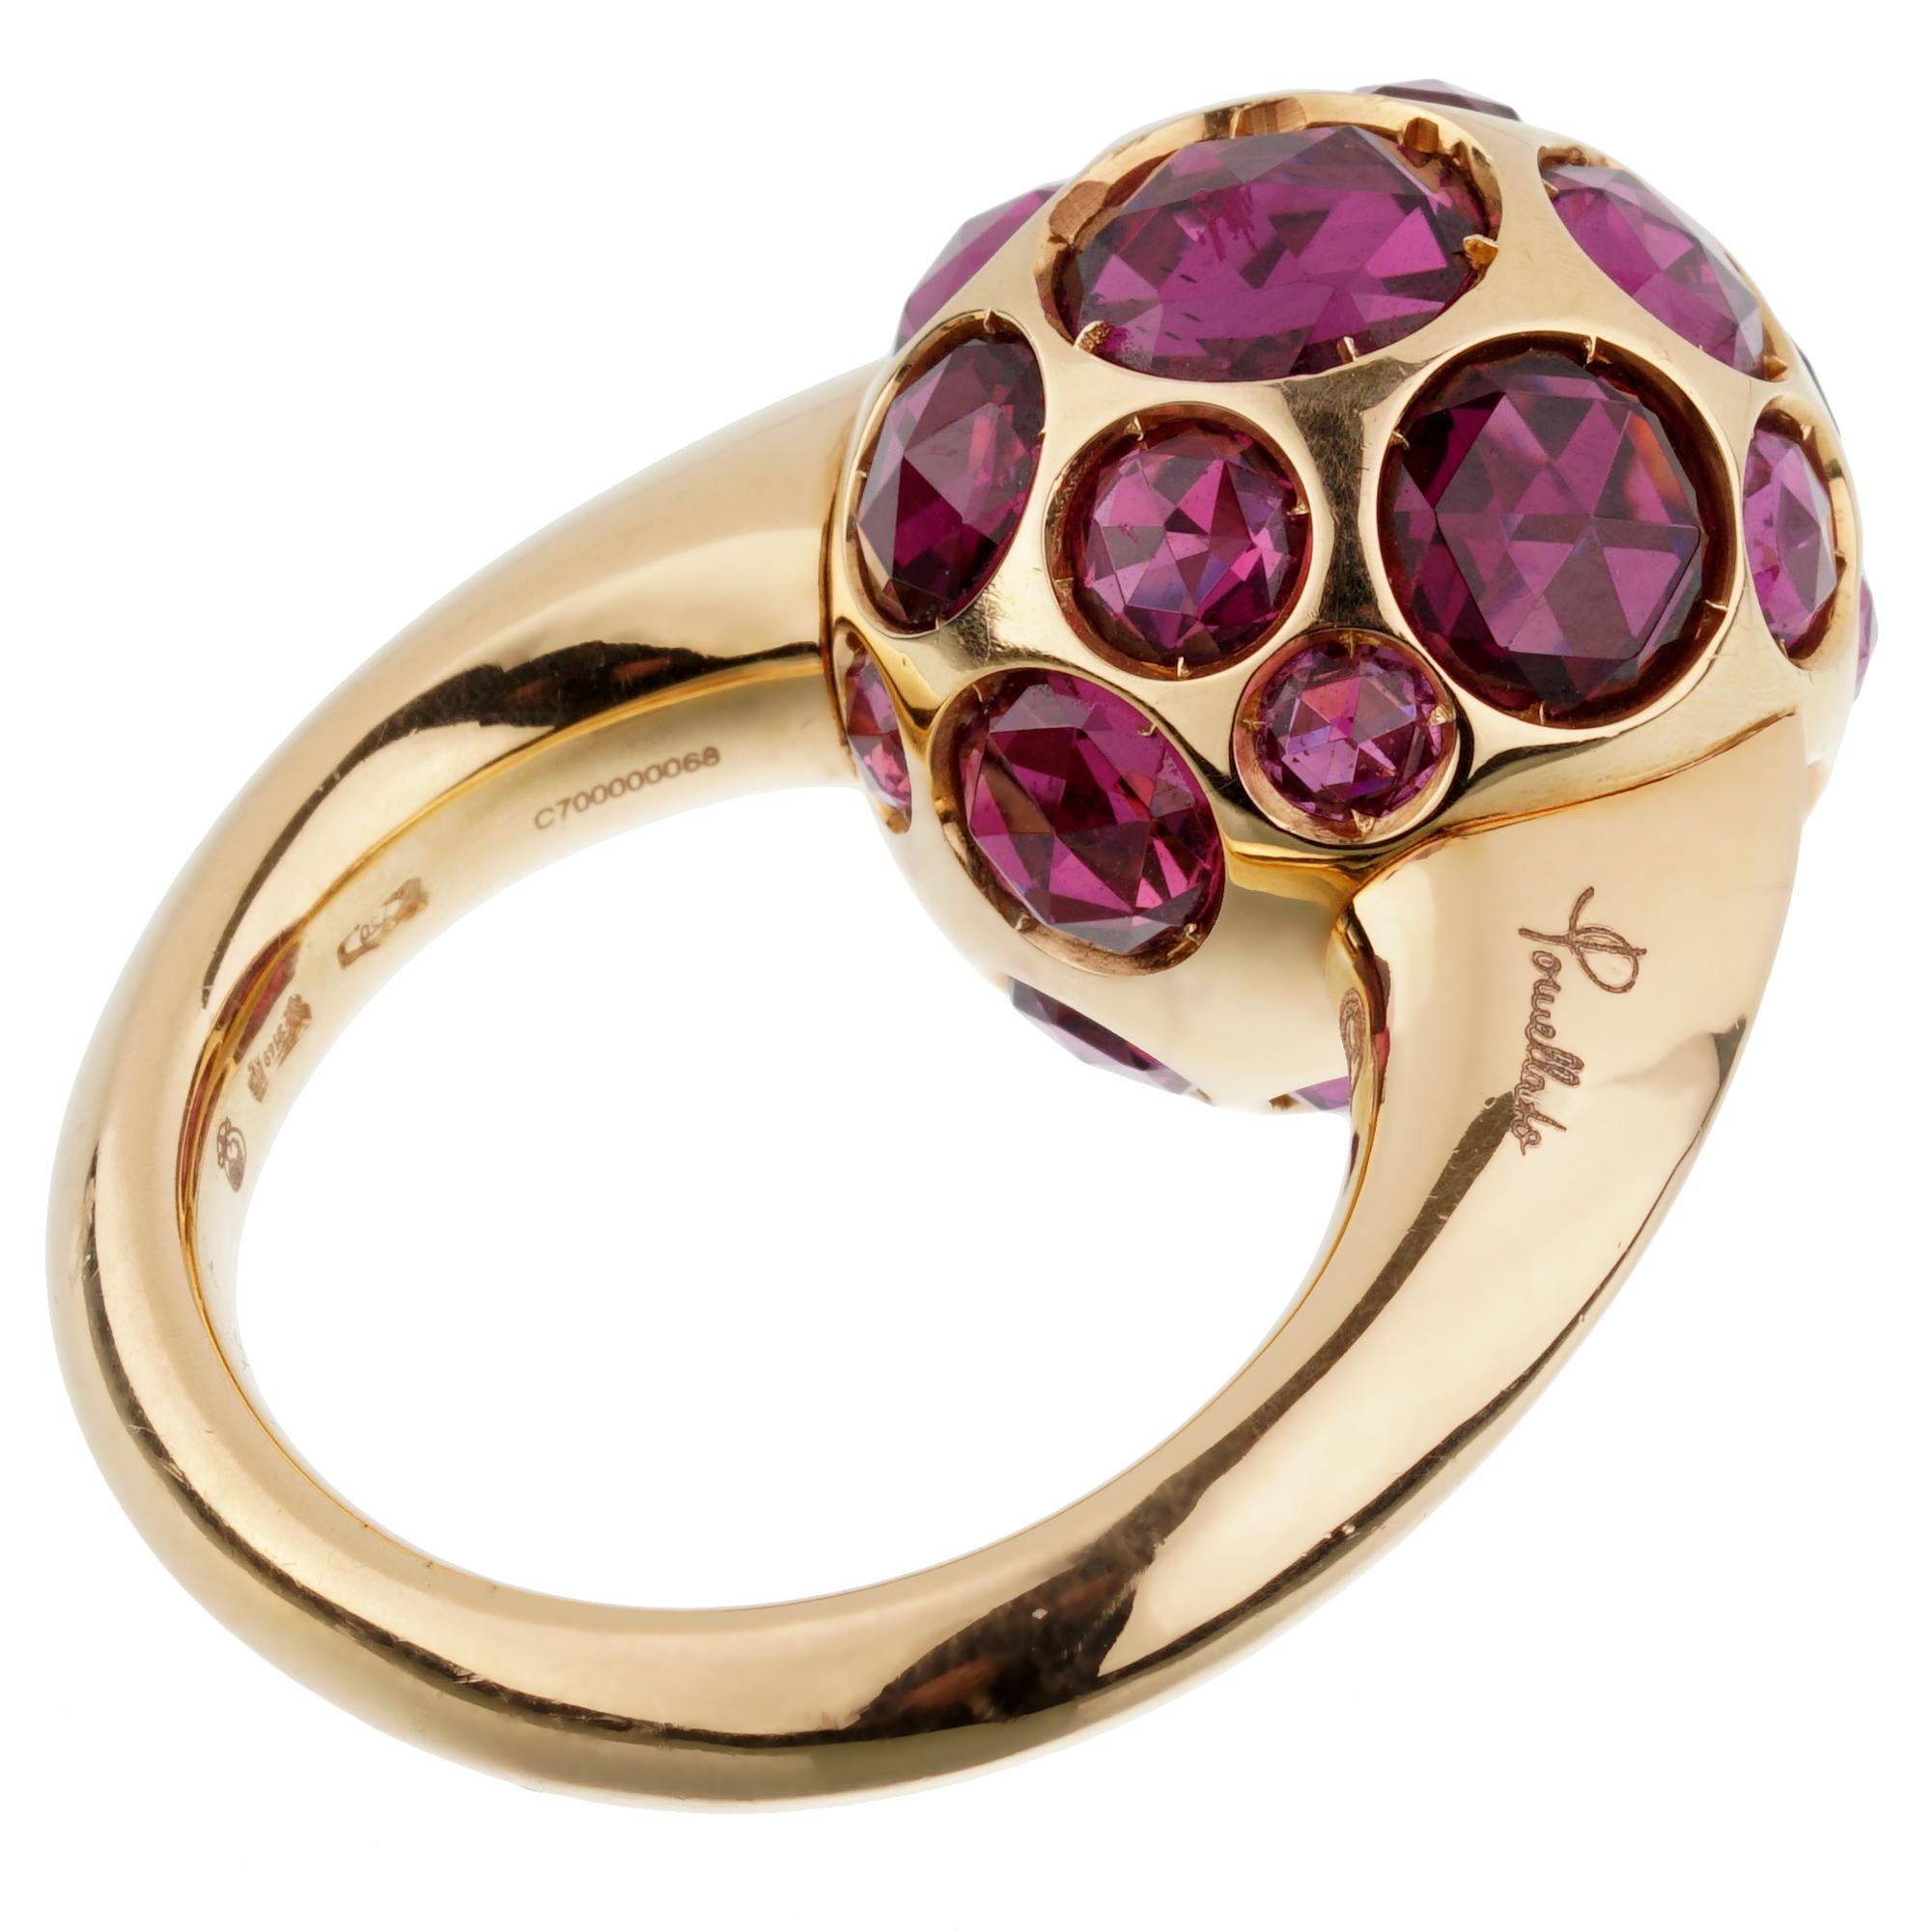 A fabulous brand new Pomellato cocktail ring showcasing 8ct of Rhodolite expertly set in 18k rose gold. The ring measures a size 7 and can be resized.